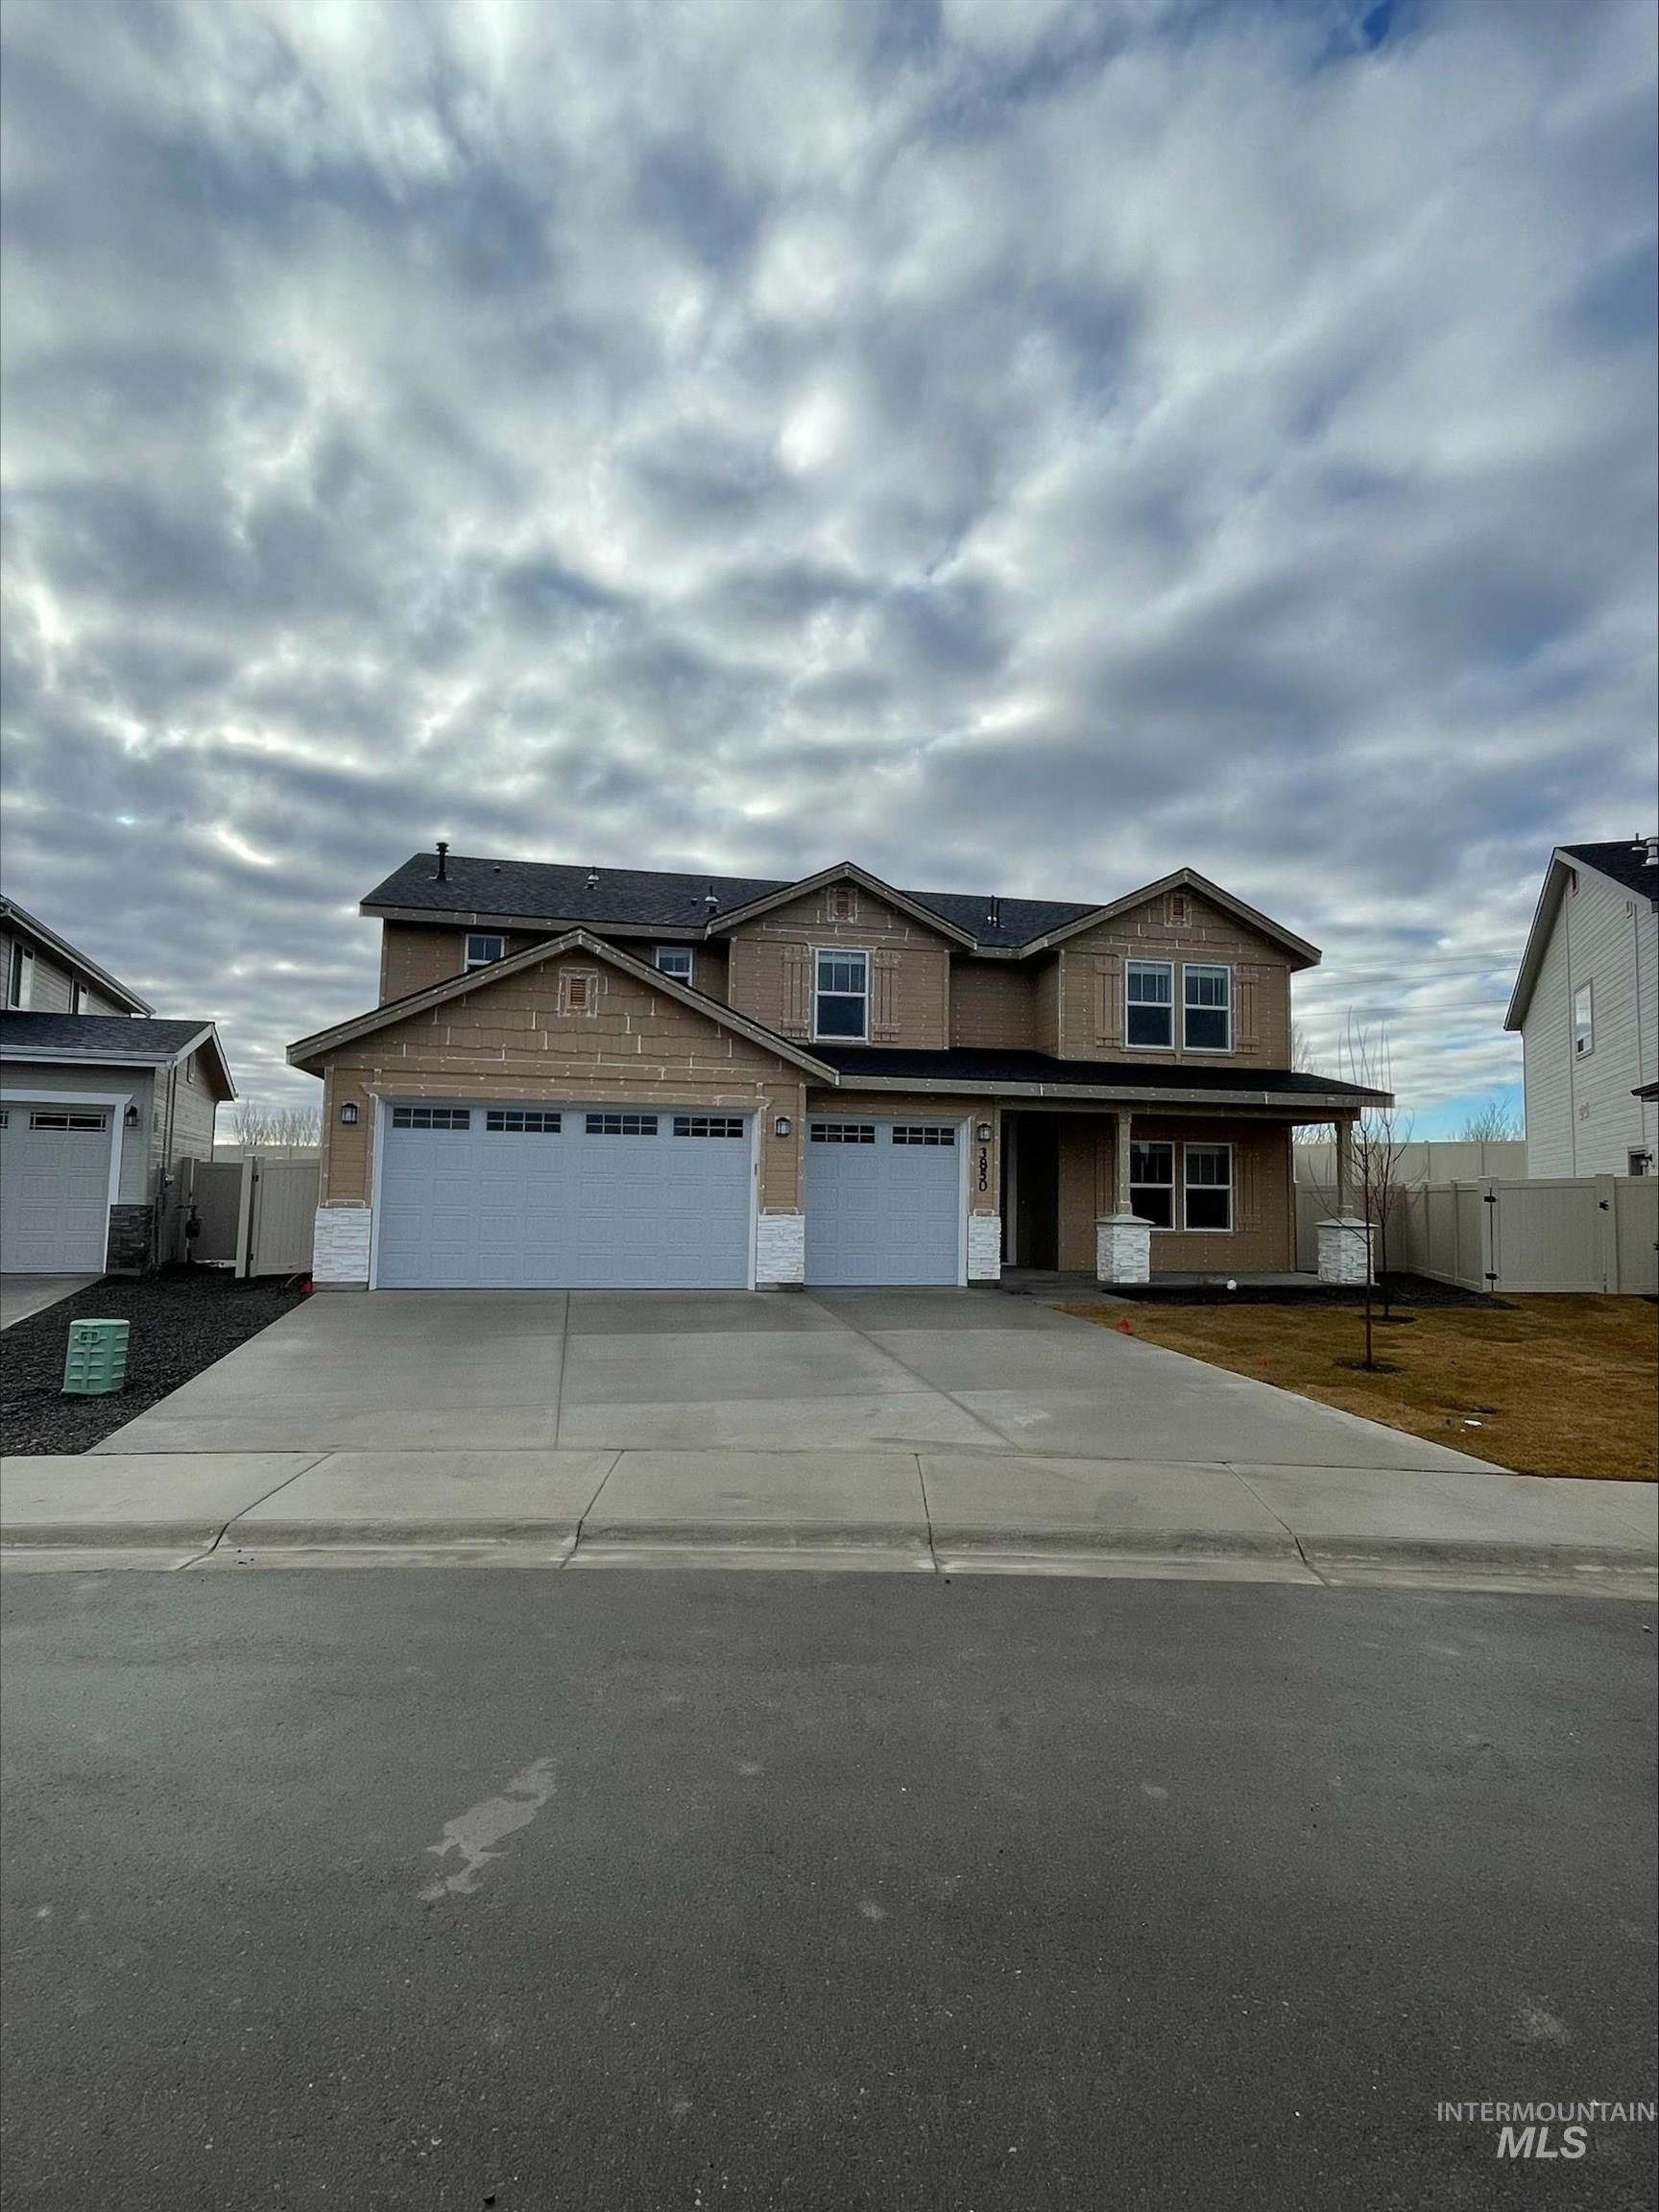 PRE SOLD Topaz with Craftsman Elevation. Photo similar. This home is HERS and Energy Star rated with annual energy savings! - Jenny LeBlanc, Main: 208-724-4920, Hubble Homes, LLC, Main: 208-433-8800,